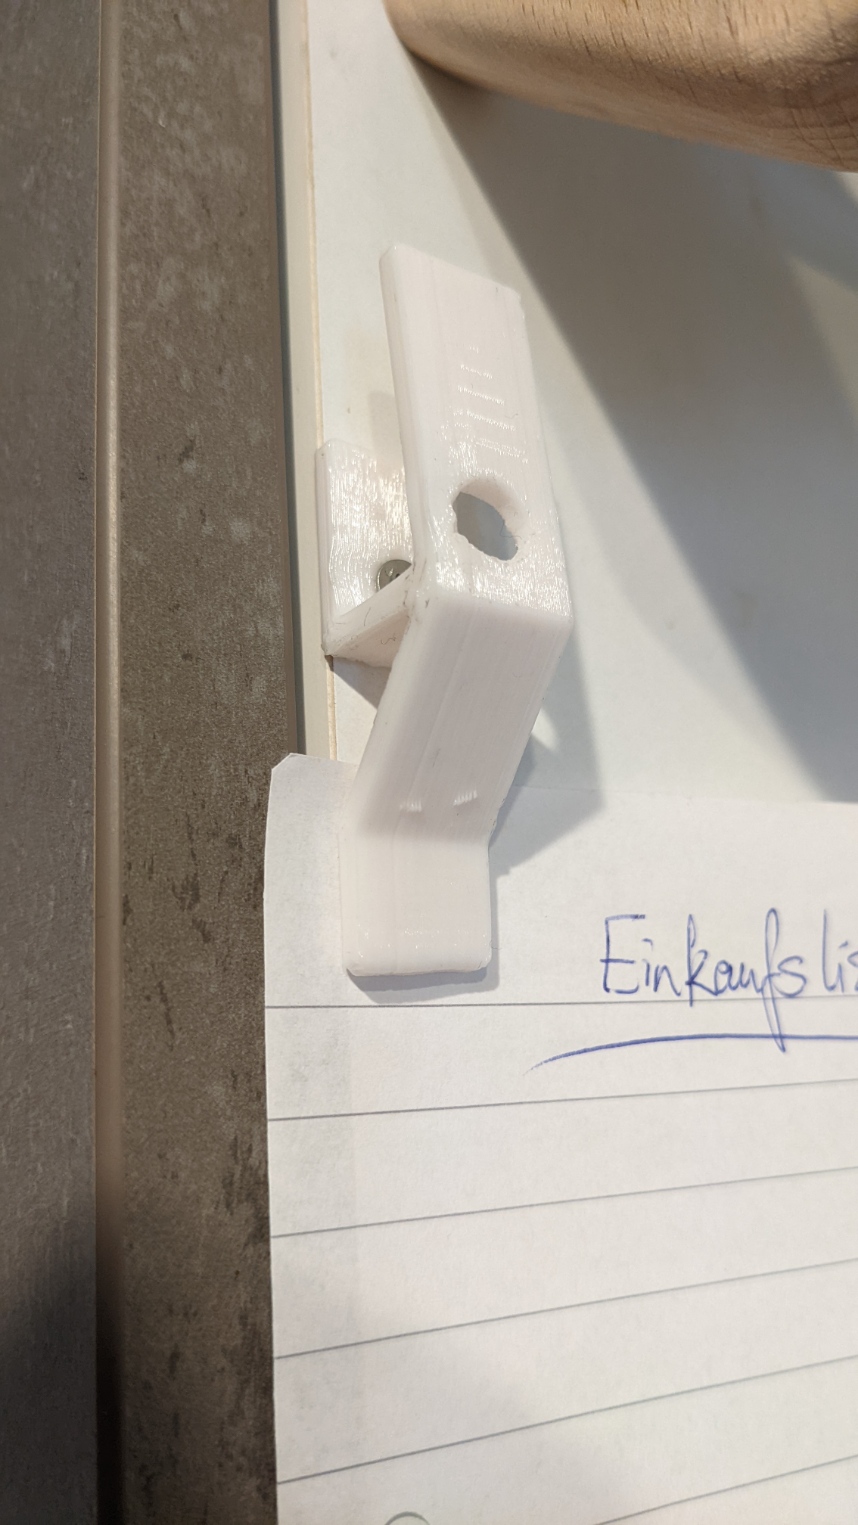 Spring Clamp Hook - Hold paper directly on the Wall